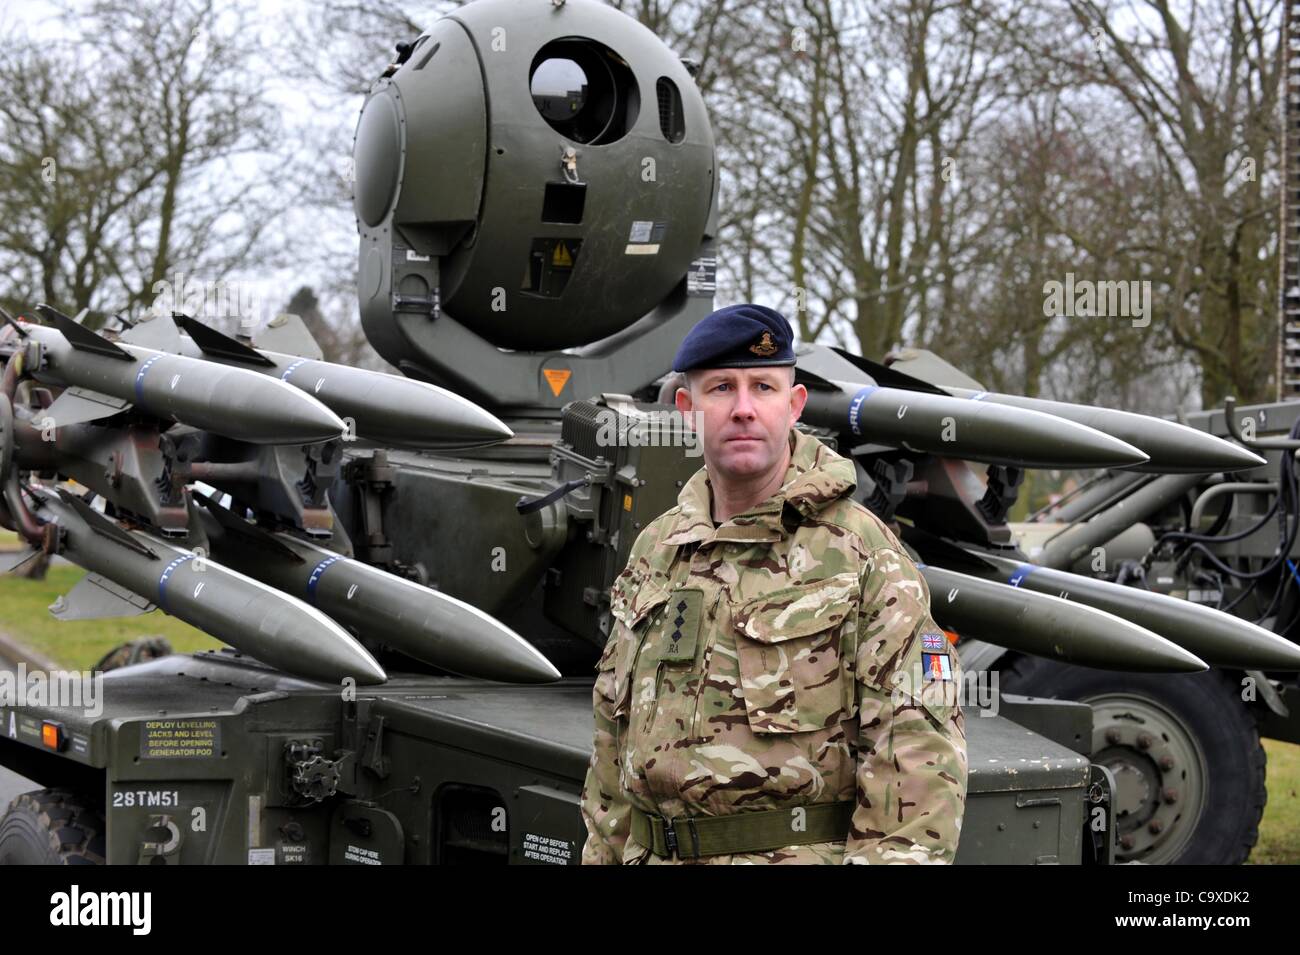 Rapier missile system, British surface-to-air missile system, UK Stock Photo